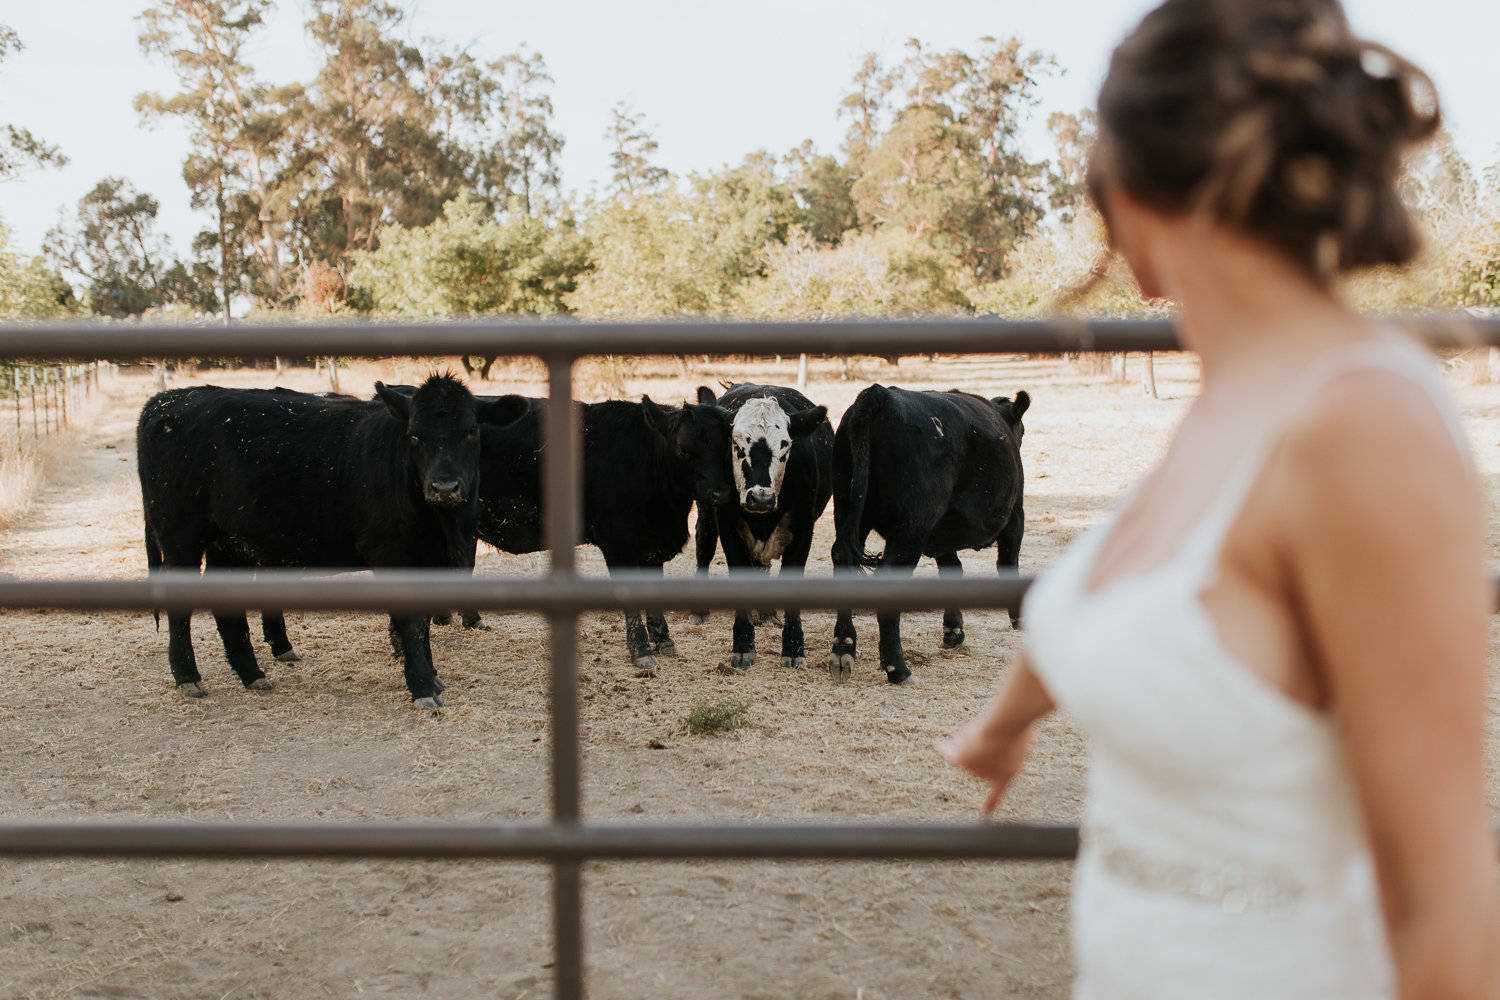 Bridal and wedding styled shoot at Ardenwood Farms in Fremont California. Vintage details, flower ideas, natural light photography, animal photography, farm photoshoot.